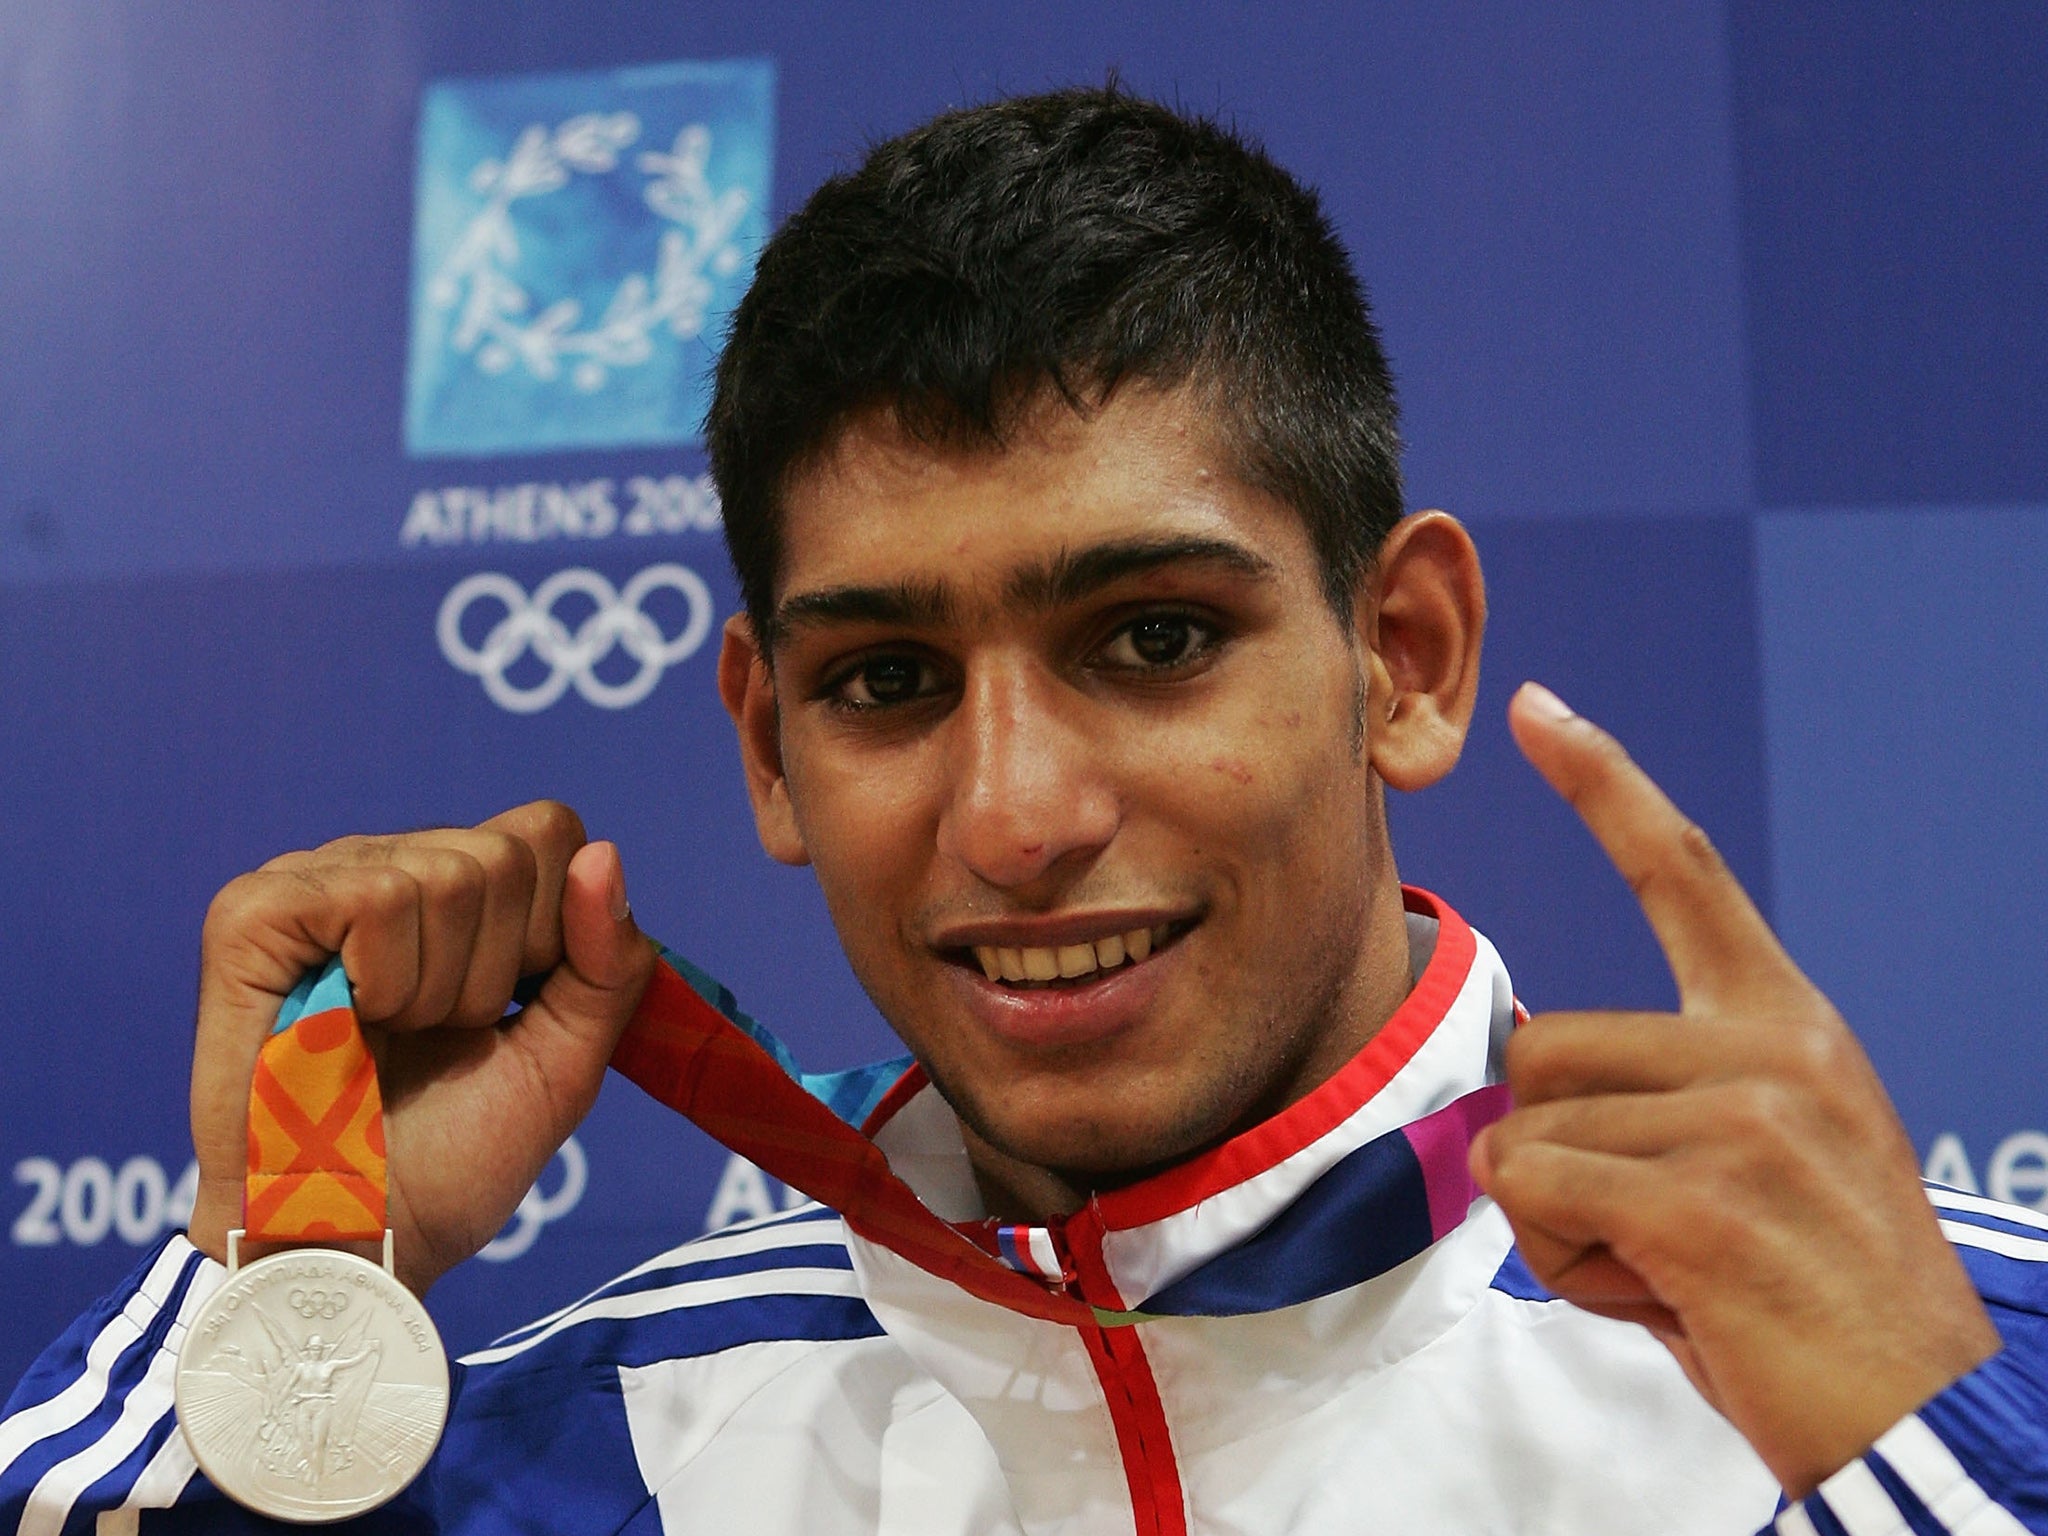 Amir Khan’s arduous journey to qualifying for the Olympics was an achievement in itself